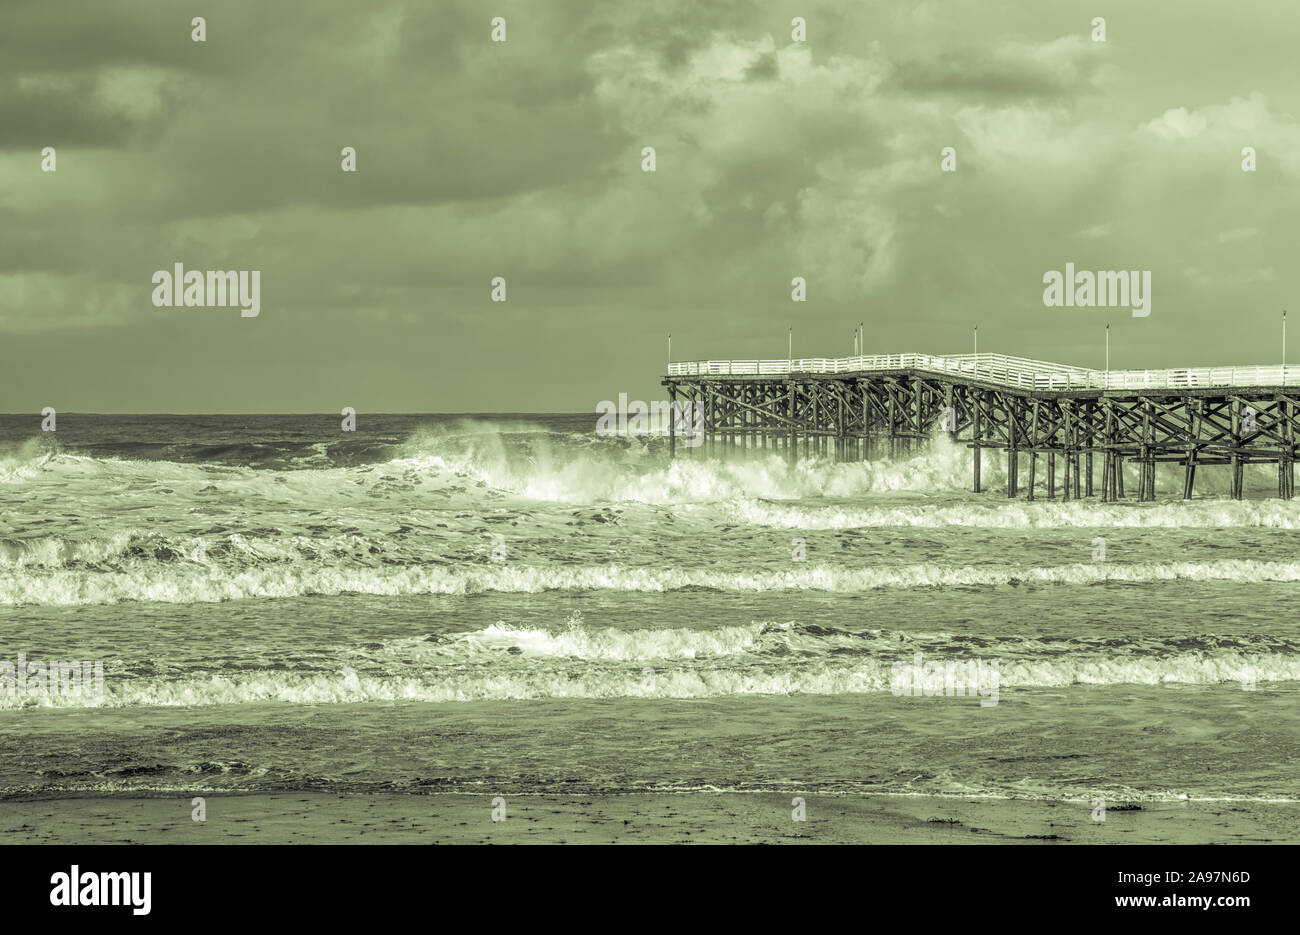 Winter surf impacting Crystal Pier. San Diego, California, USA. Presented in duotone. Stock Photo